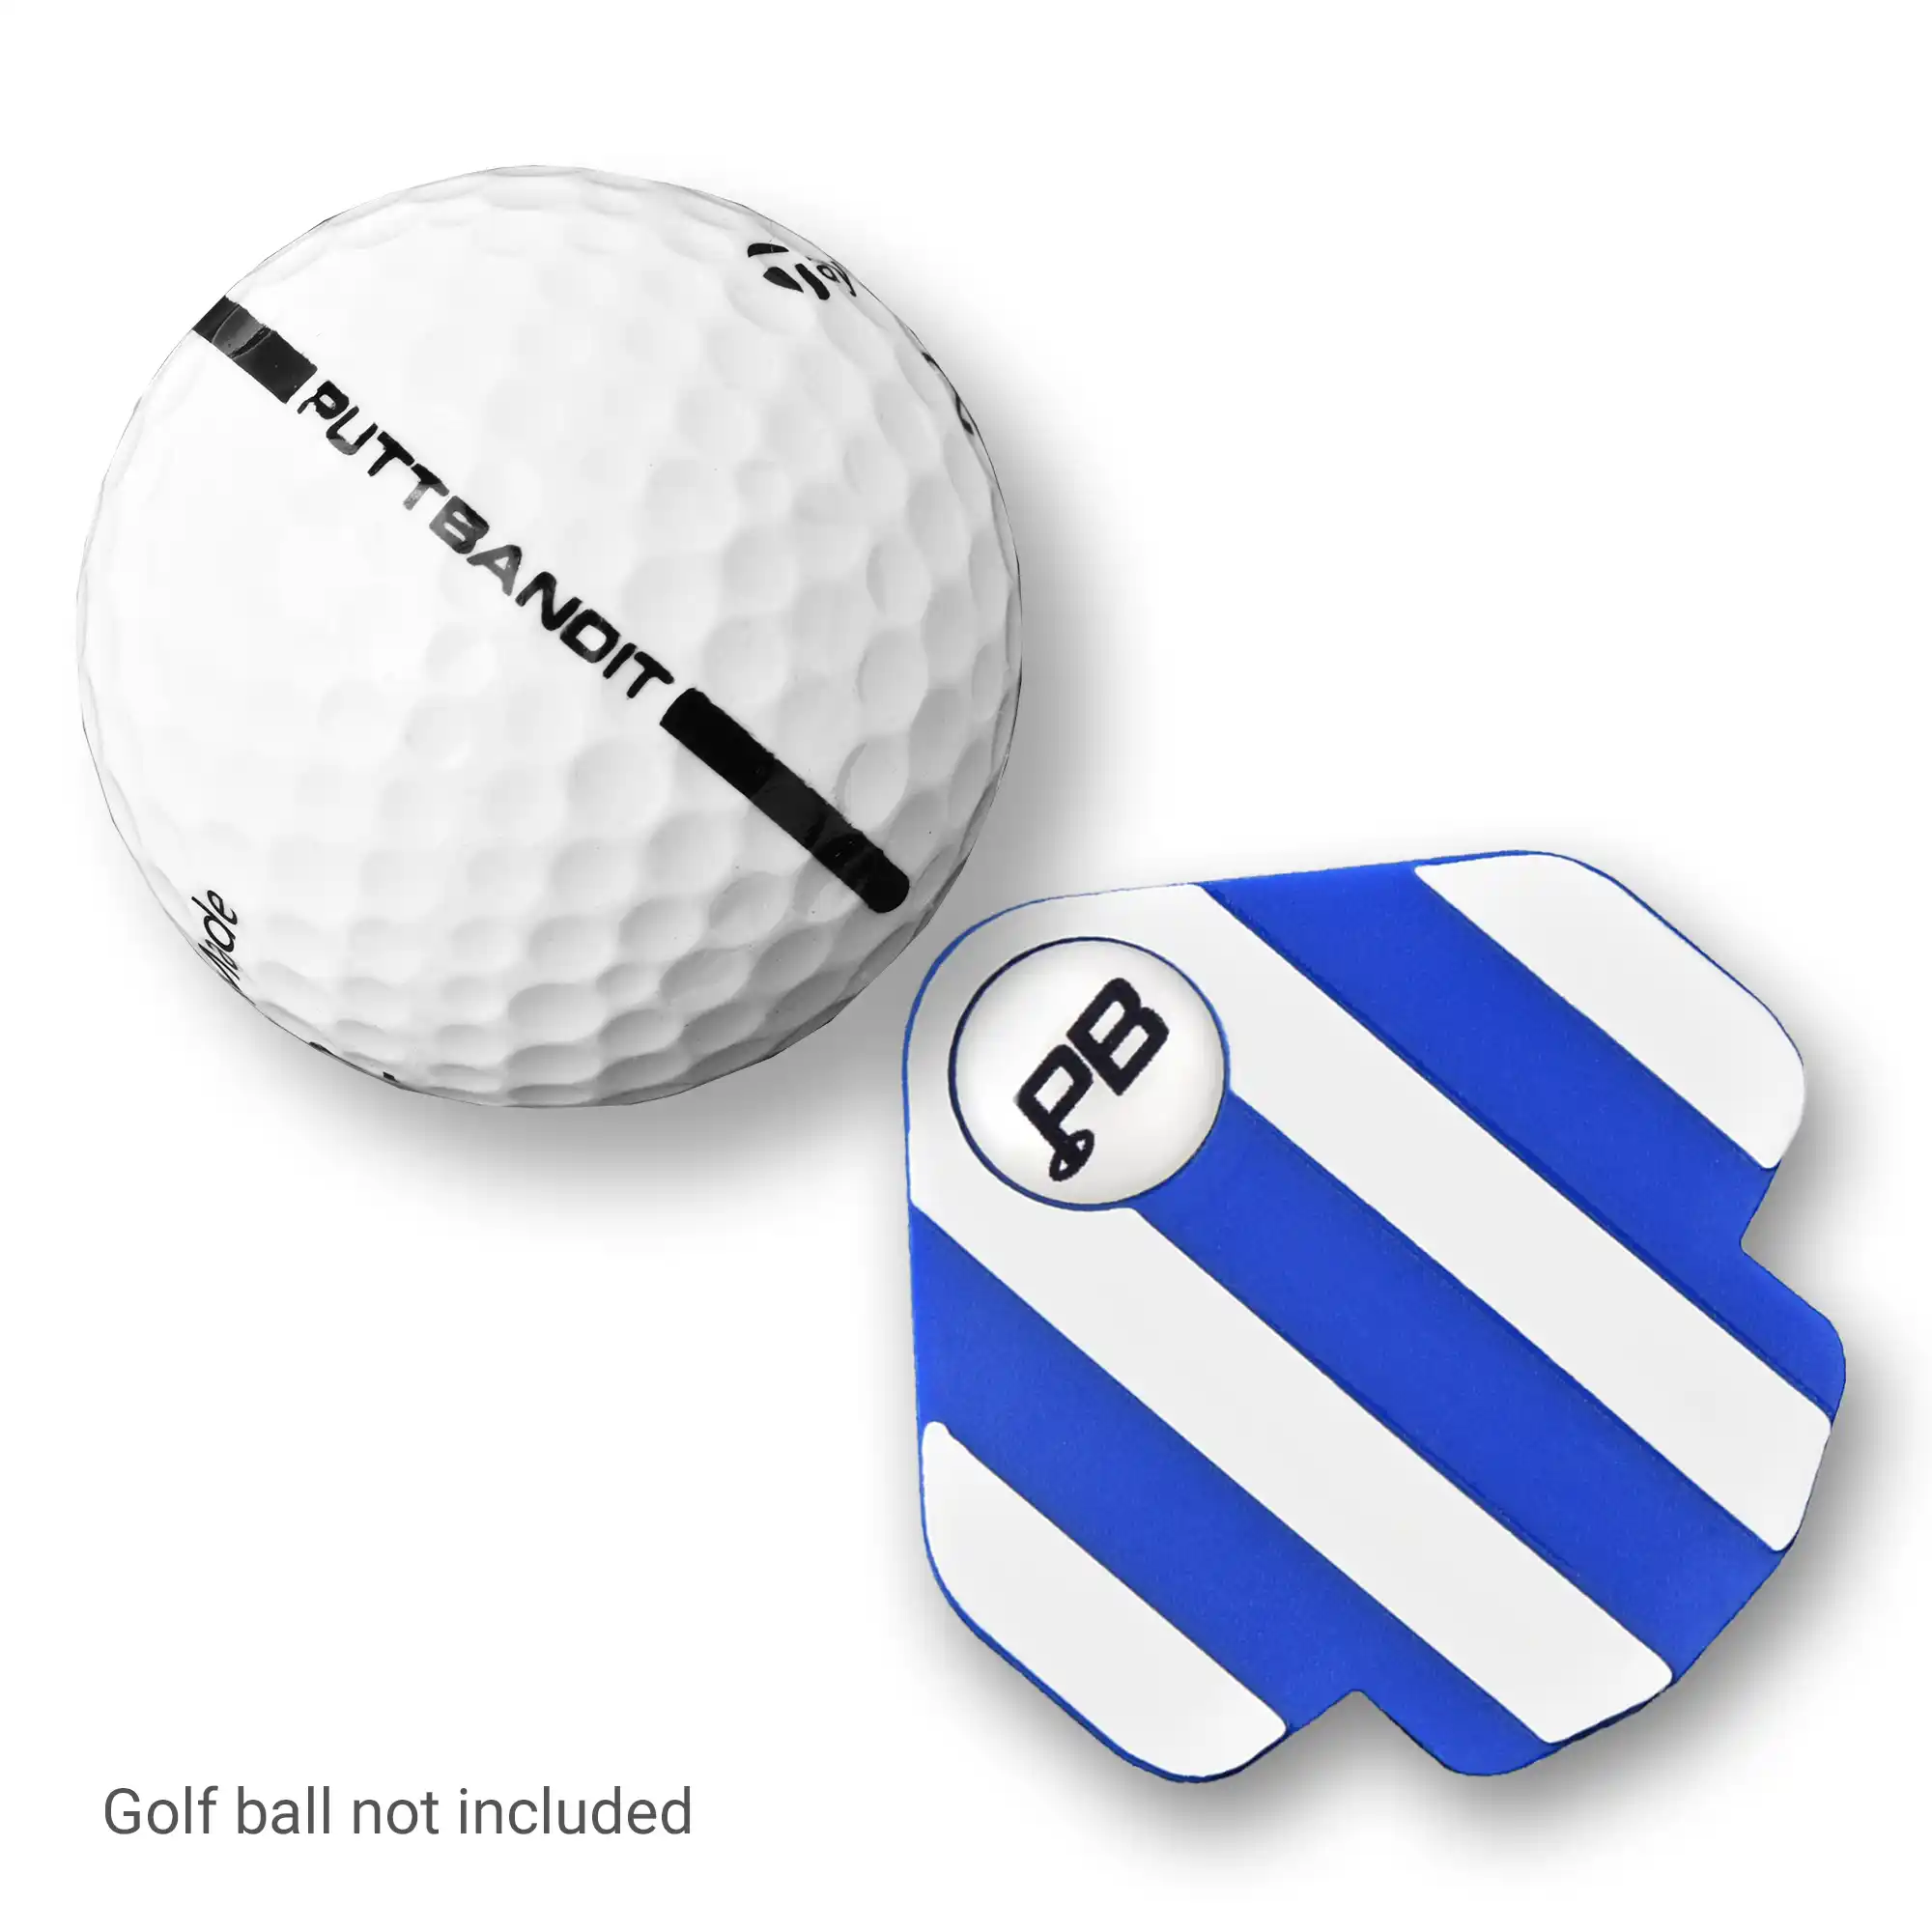 Puttbandit Classic blue golf ball marker top view with golf ball, not included text